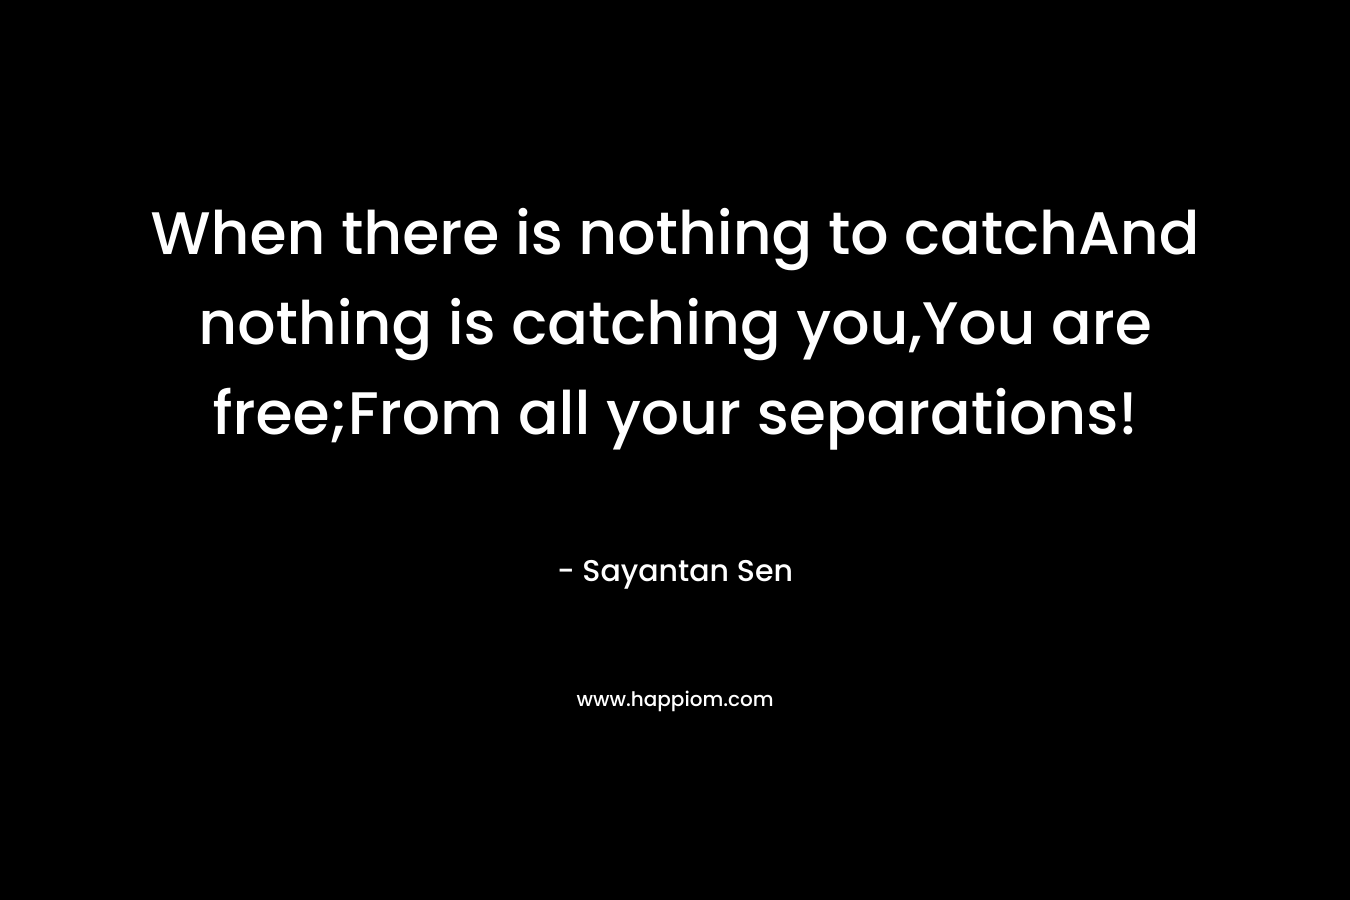 When there is nothing to catchAnd nothing is catching you,You are free;From all your separations!